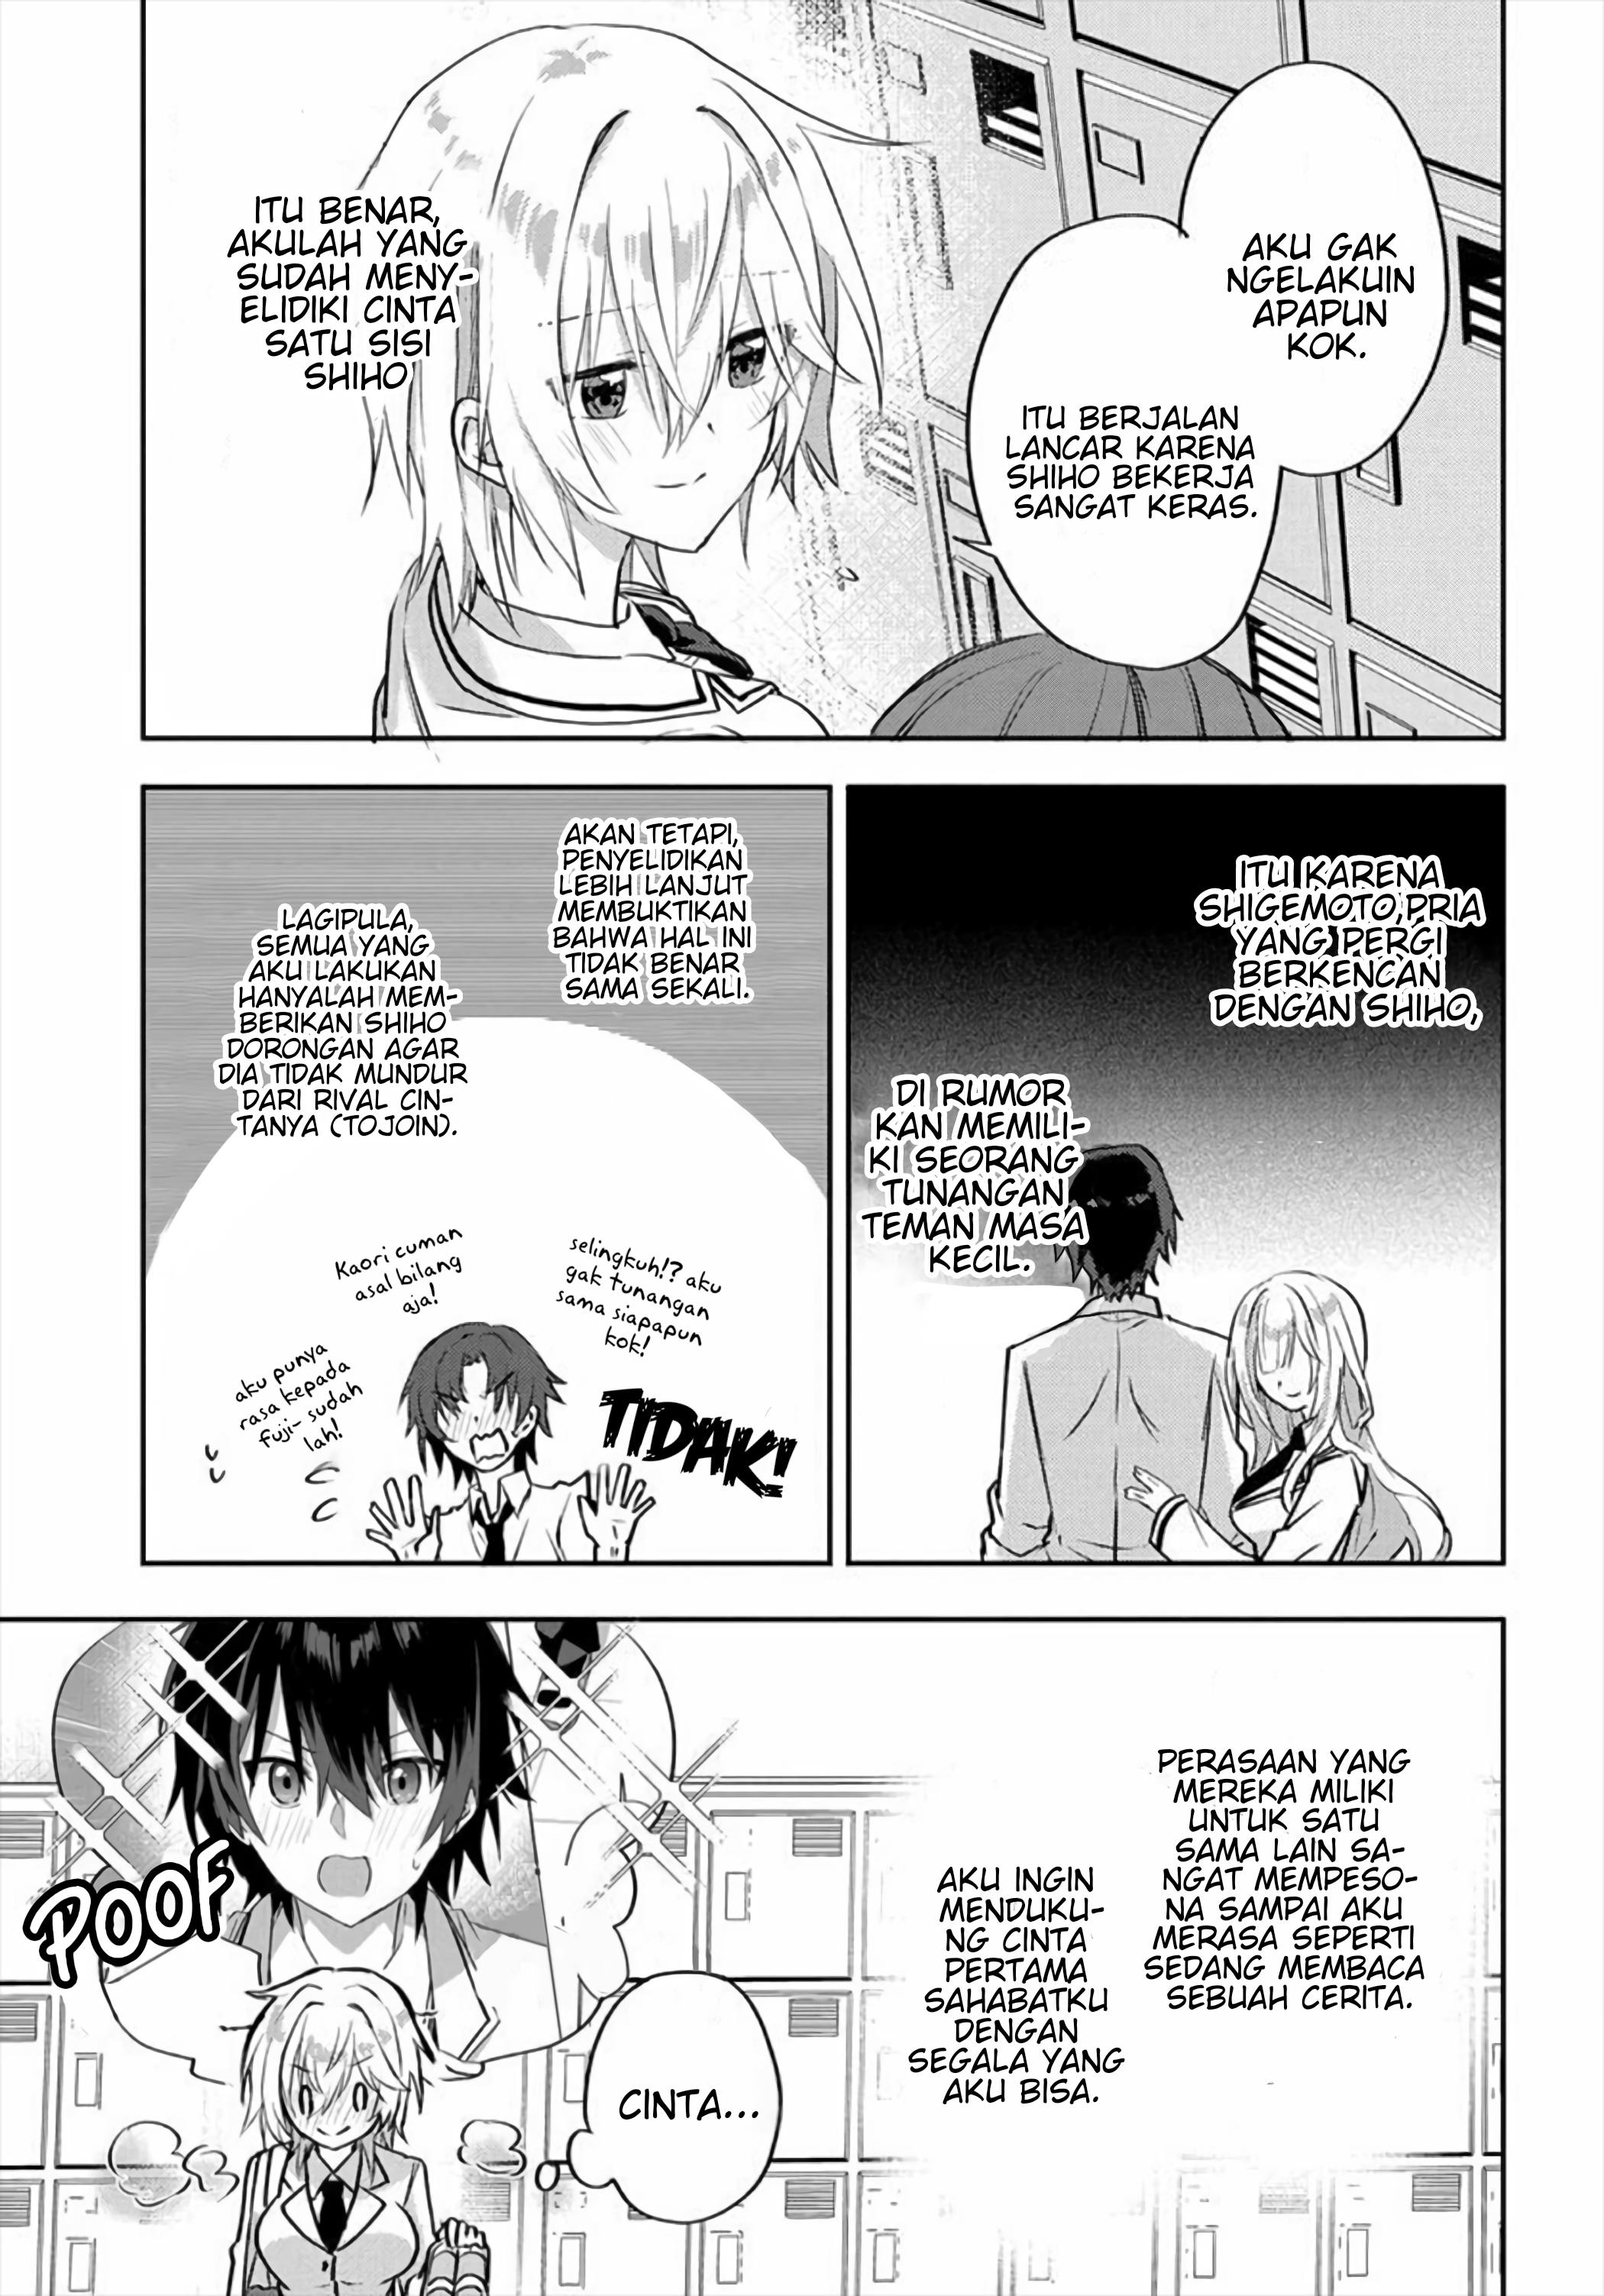 Since I'Ve Entered The World Of Romantic Comedy Manga, I'Ll Do My Best To Make The Losing Heroine Happy. Chapter 2.1 - 89